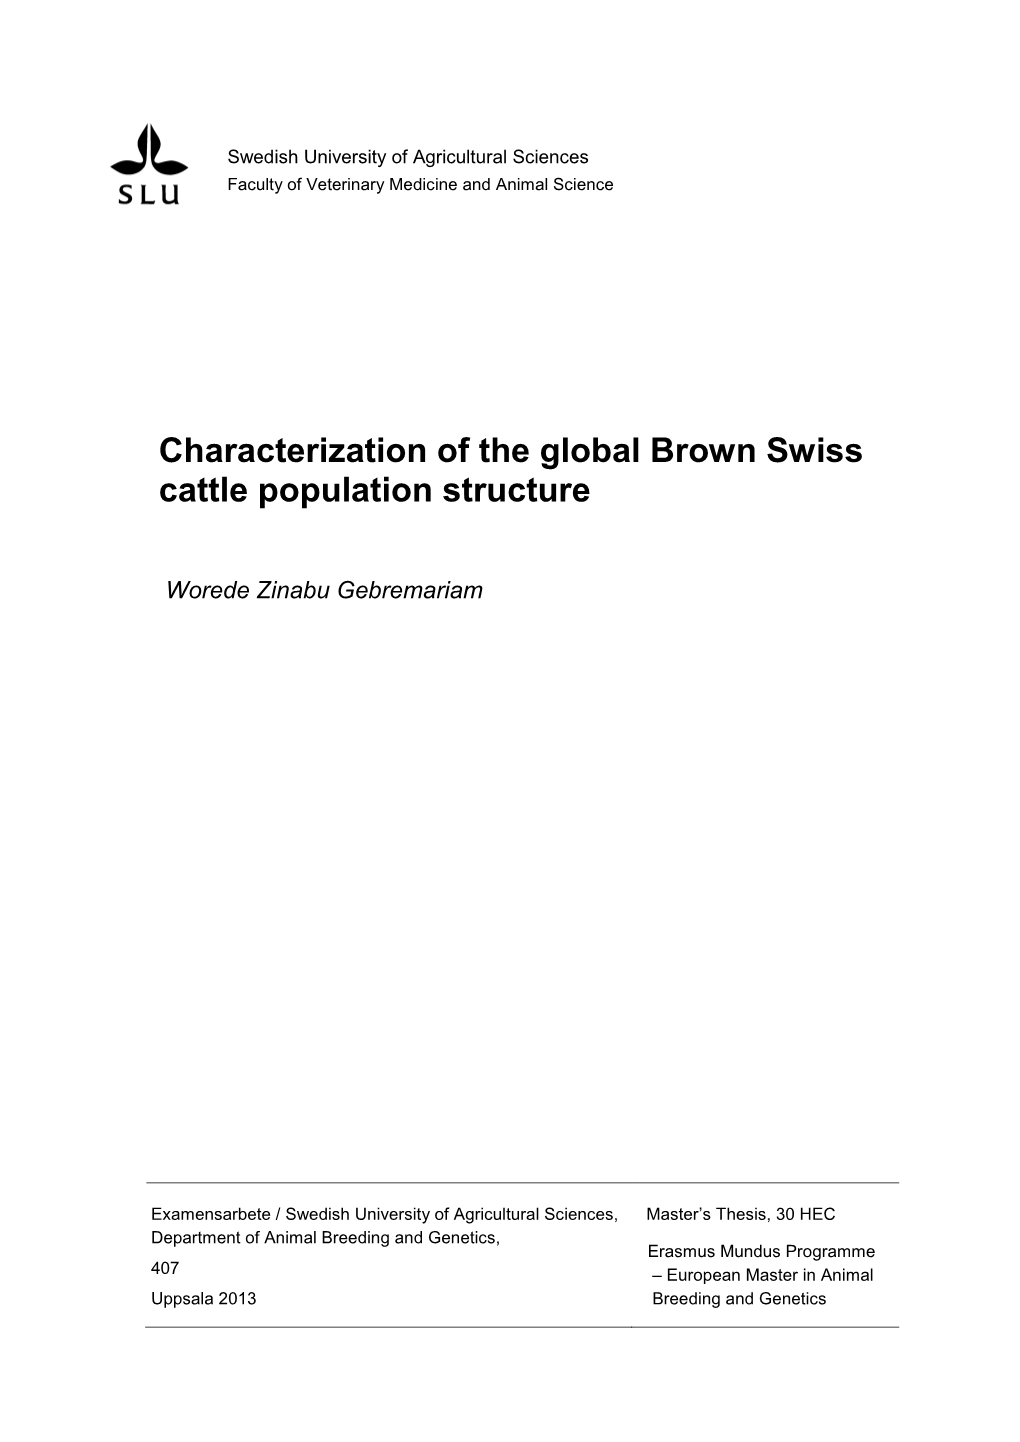 Characterization of the Global Brown Swiss Cattle Population Structure